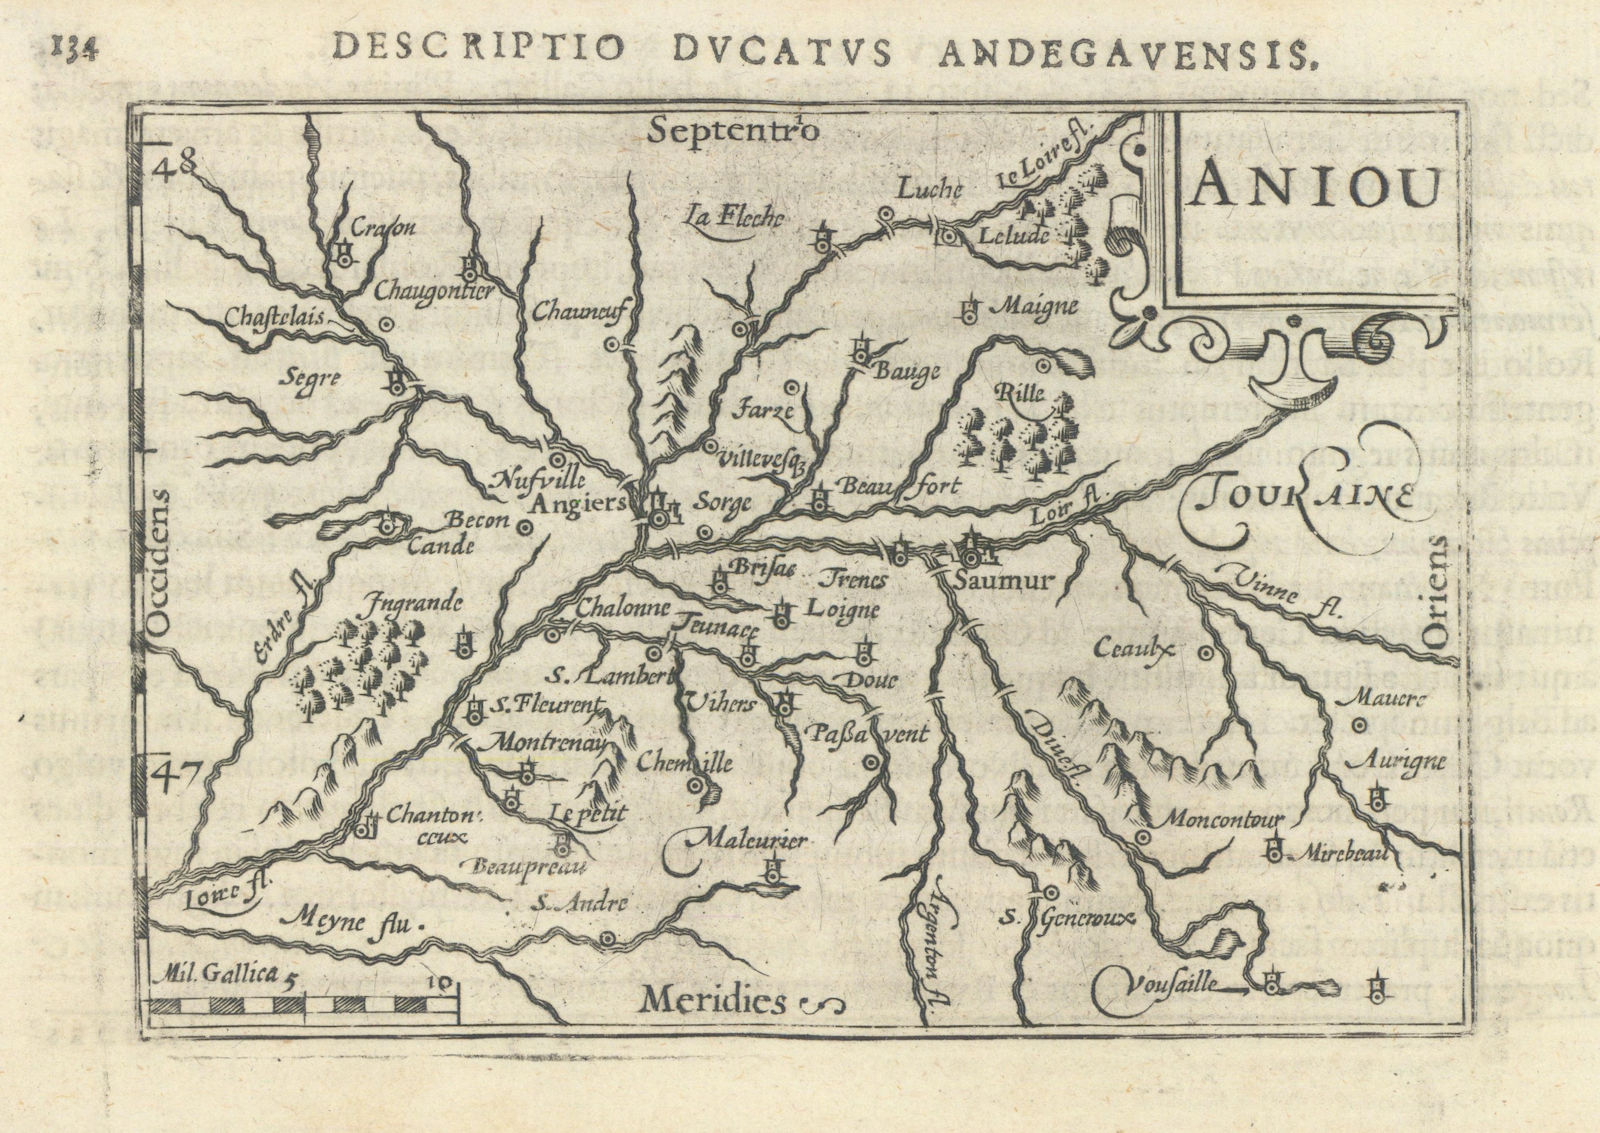 Ducatus Andegavensis / Aniou by Bertius / Langenes. The Duchy of Anjou 1603 map